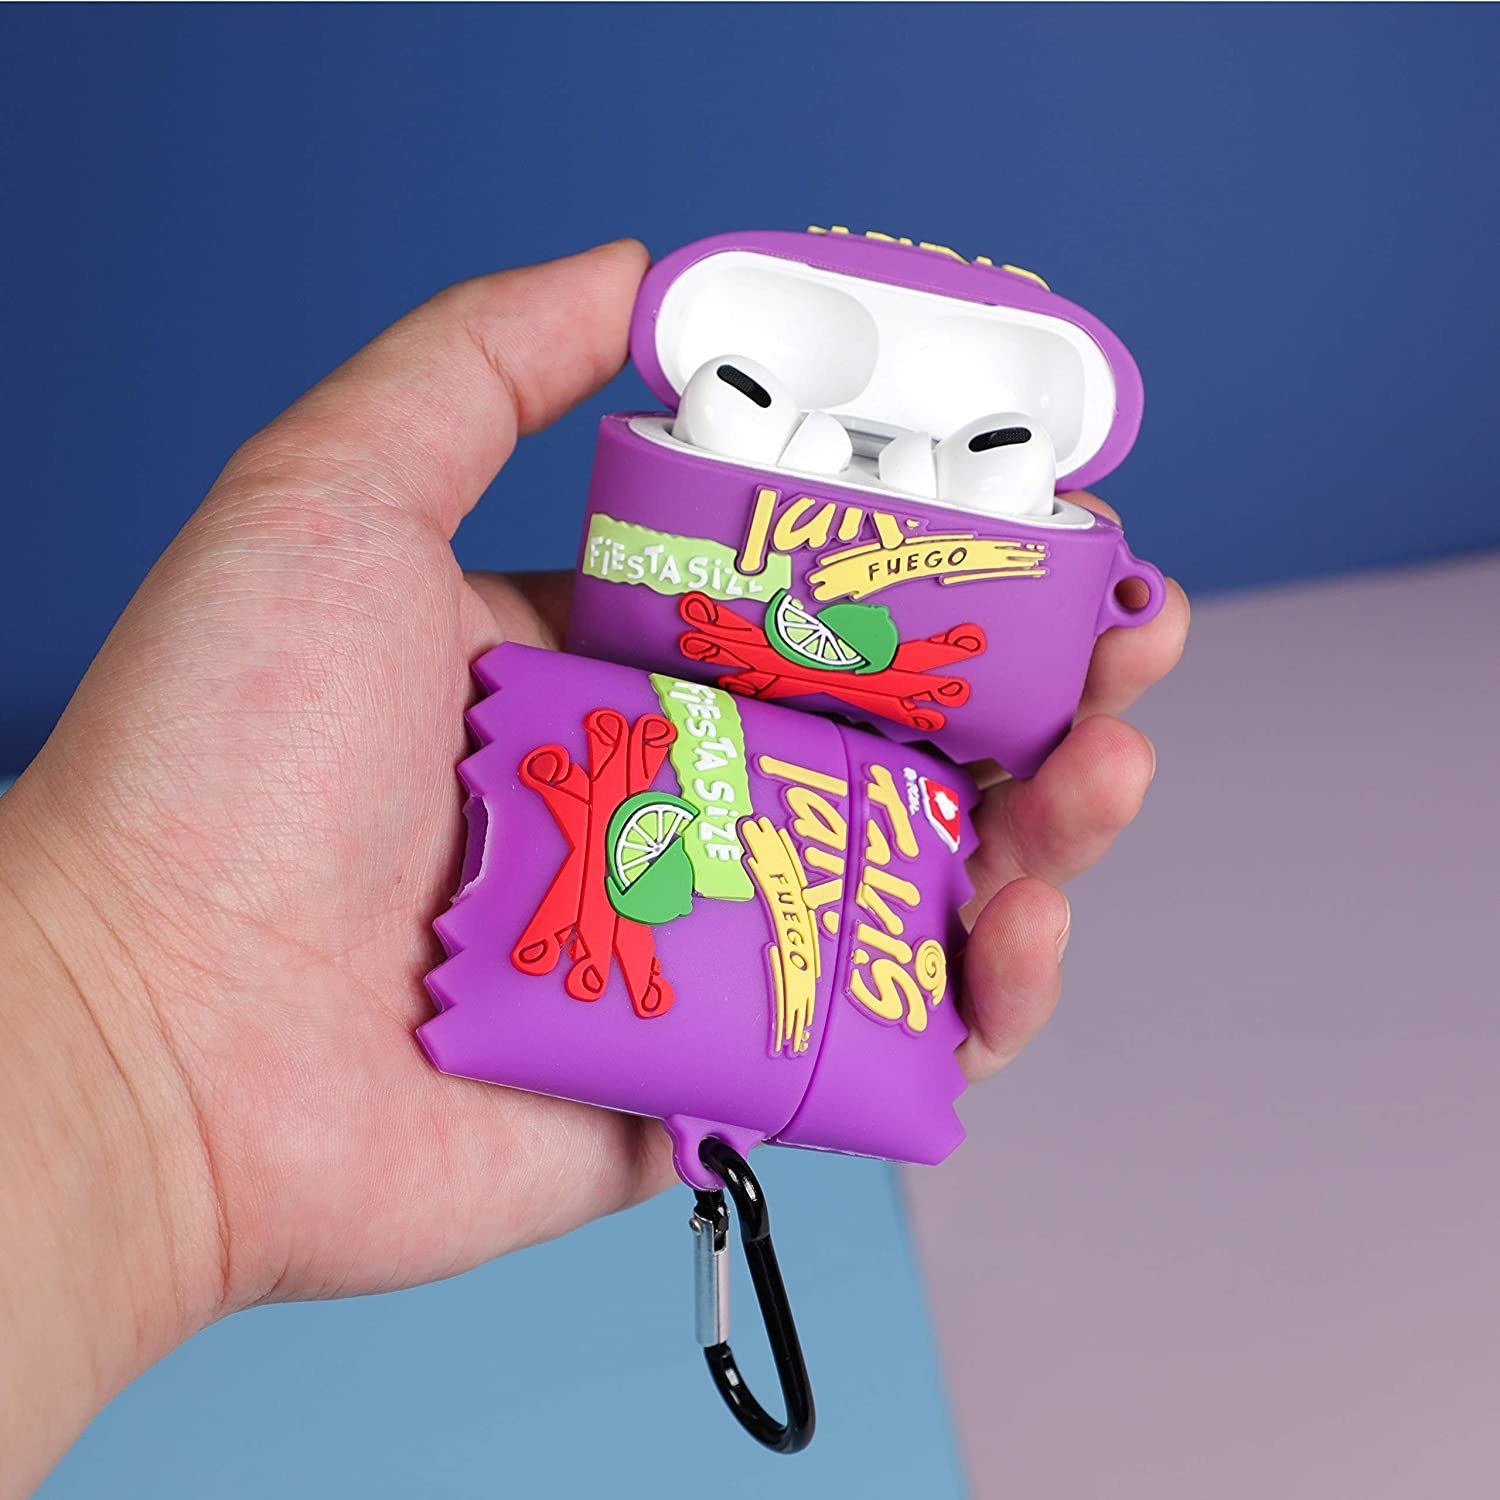 A person holding two Takis inspired AirPods cases